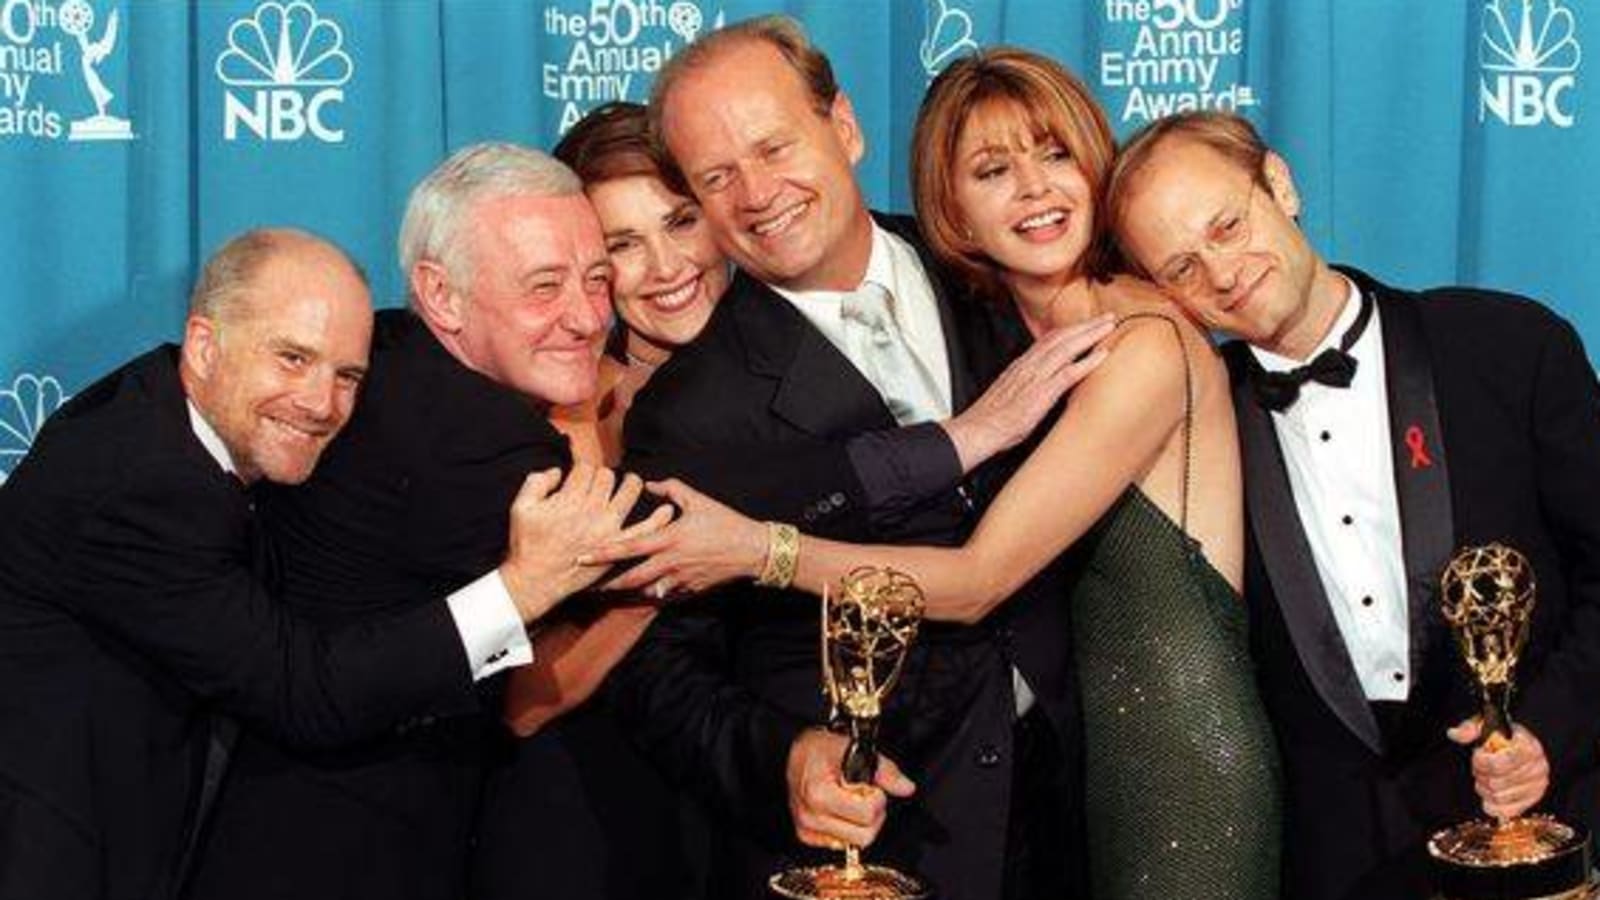 How have these Emmy wins held up over the years?